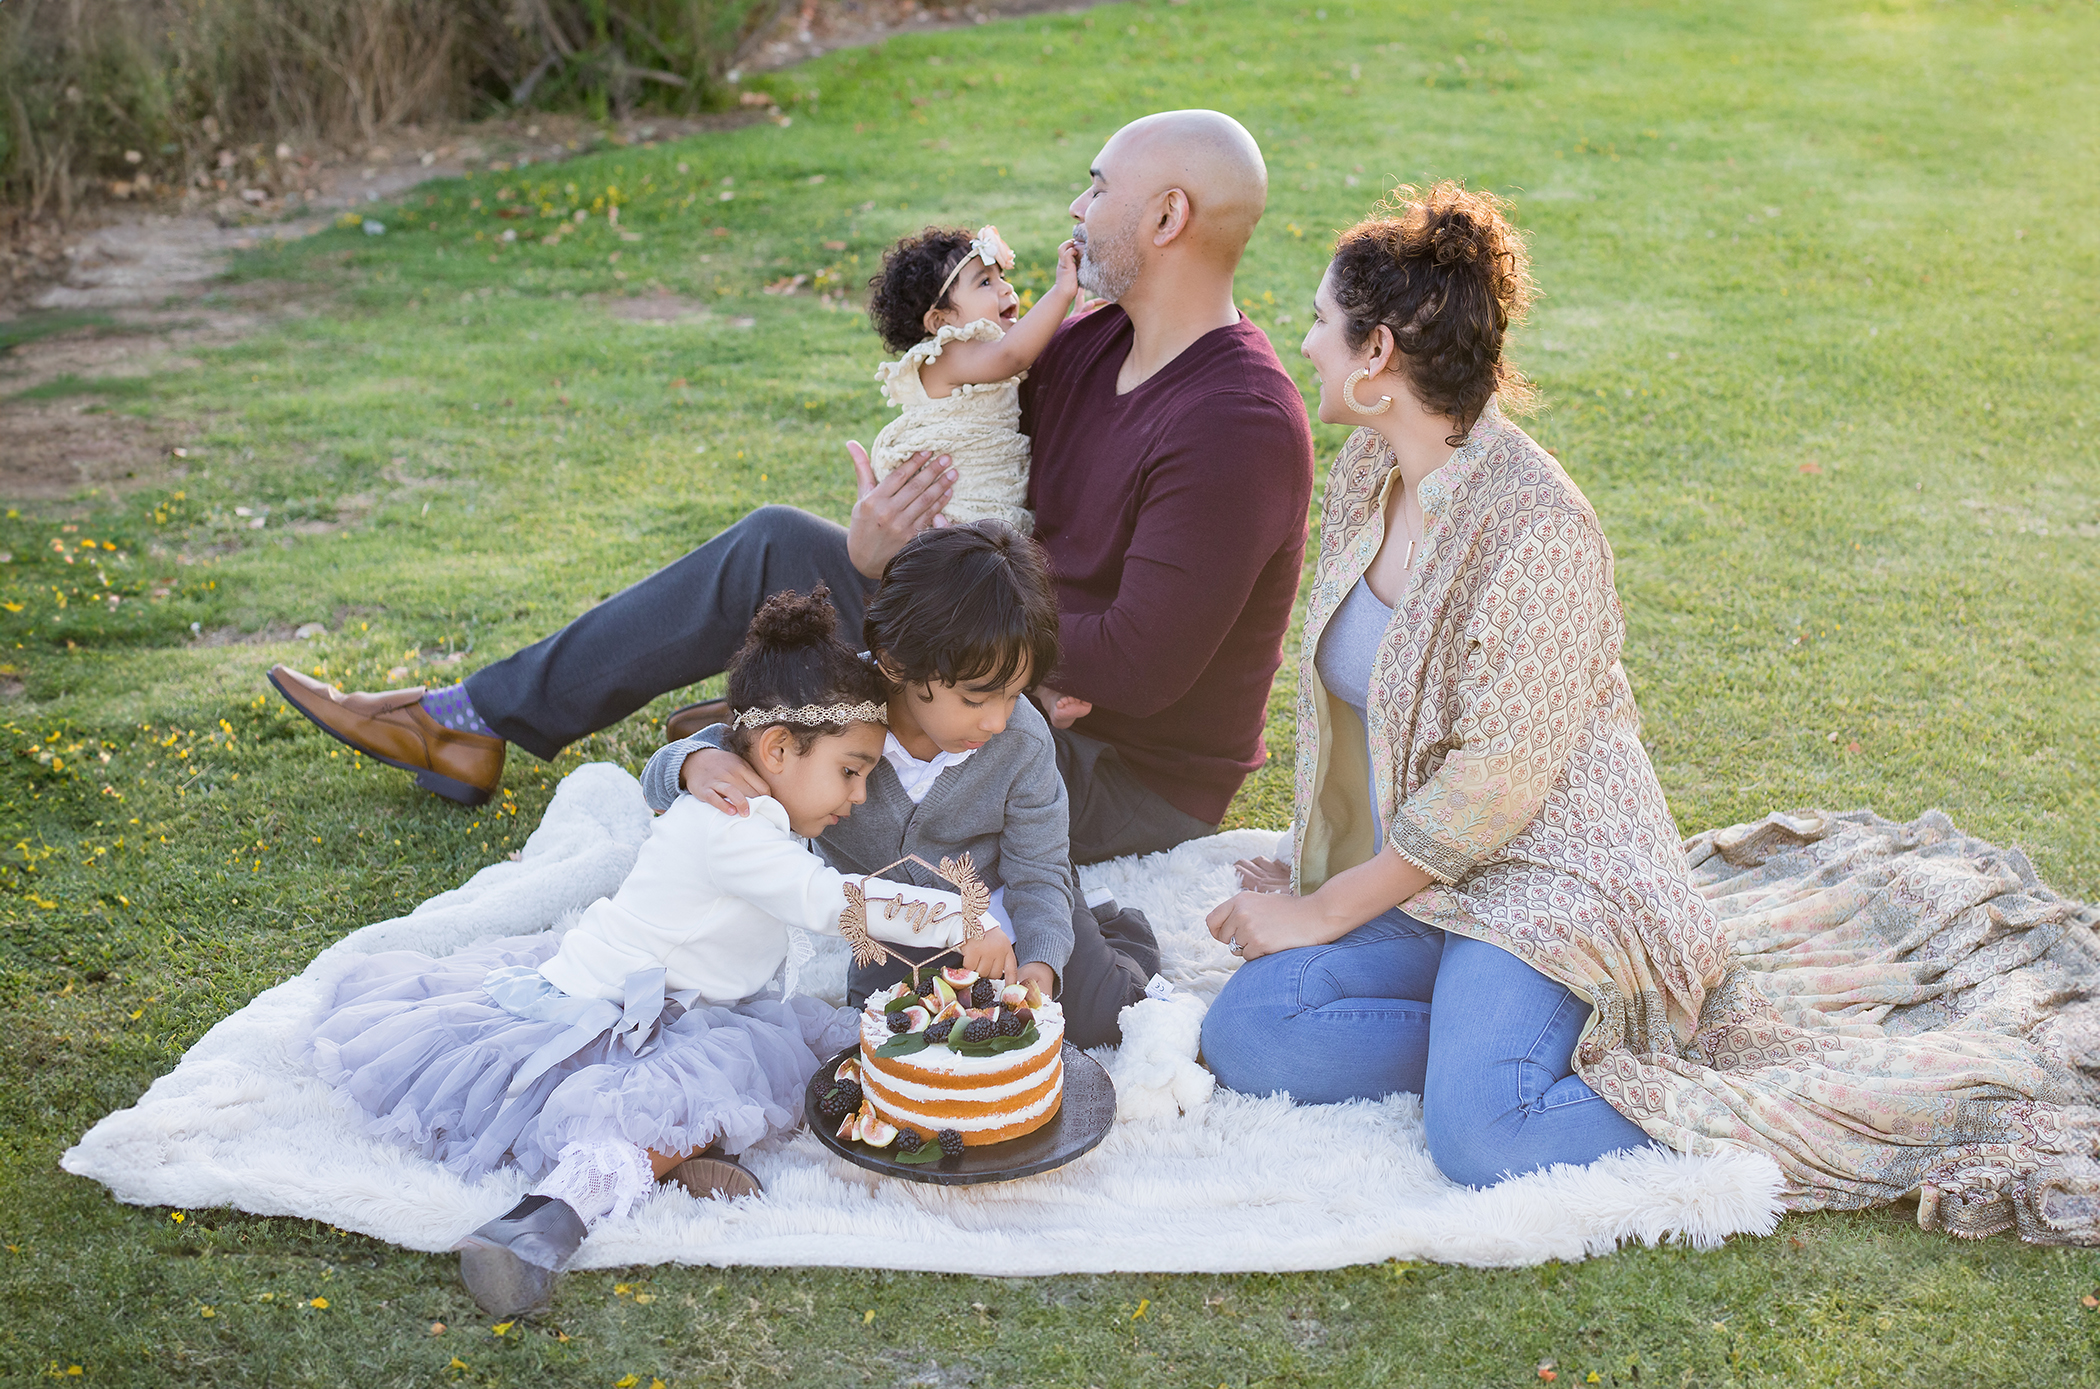 Golden hour summer family photos with a perfectly planned picnic and cake smash included in the photography session,